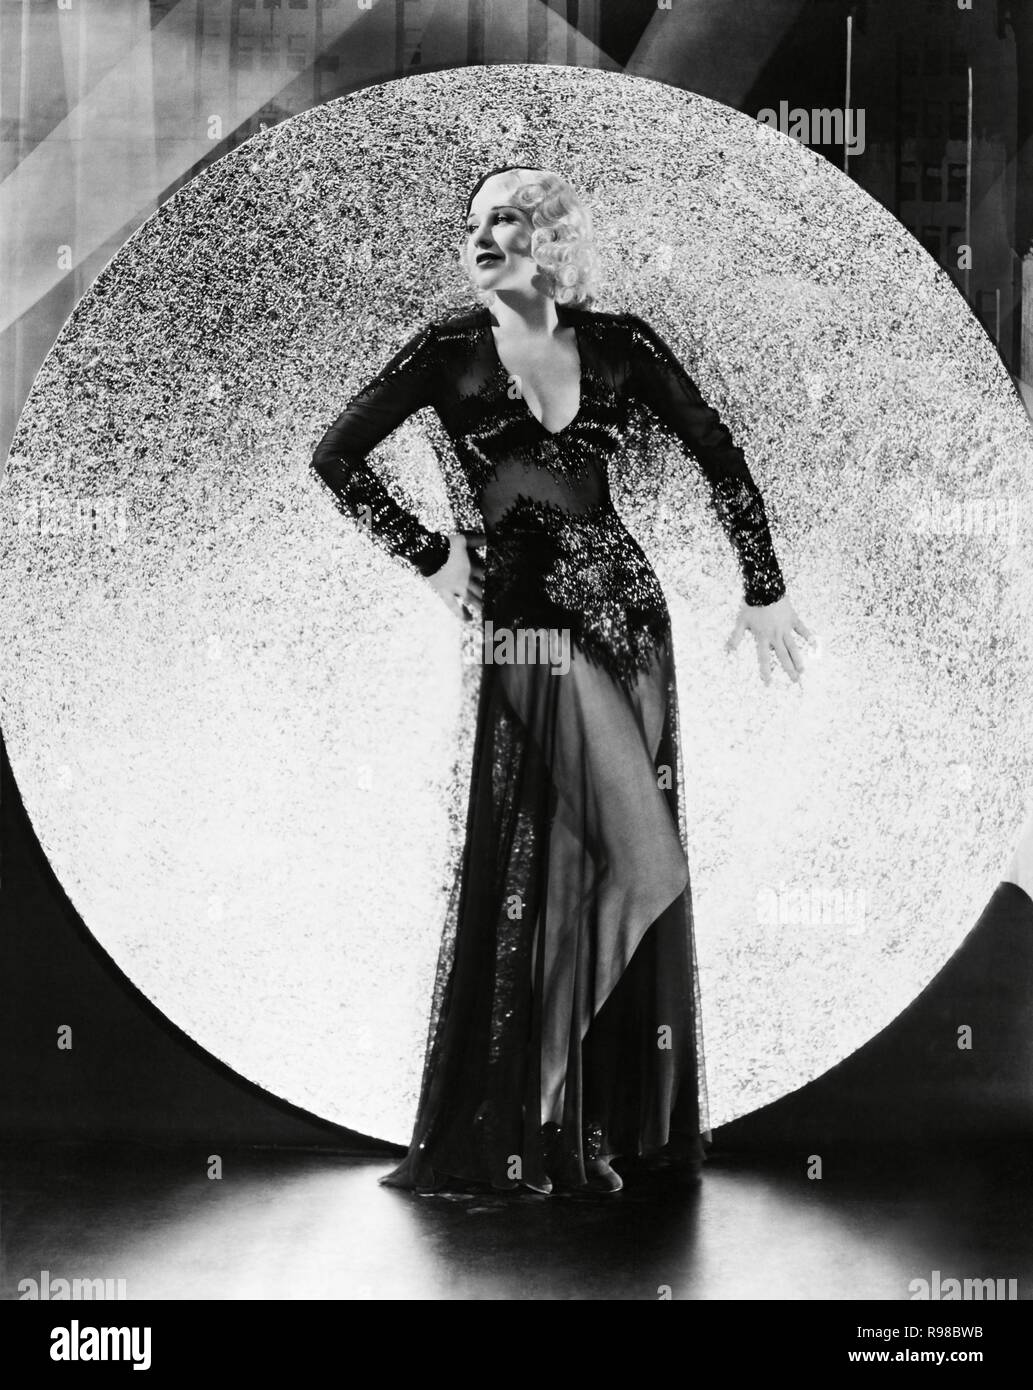 Original film title: GOLD DIGGERS OF 1933. English title: GOLD DIGGERS OF 1933. Year: 1933. Director: MERVYN LEROY. Stars: GINGER ROGERS. Credit: WARNER BROTHERS / Album Stock Photo